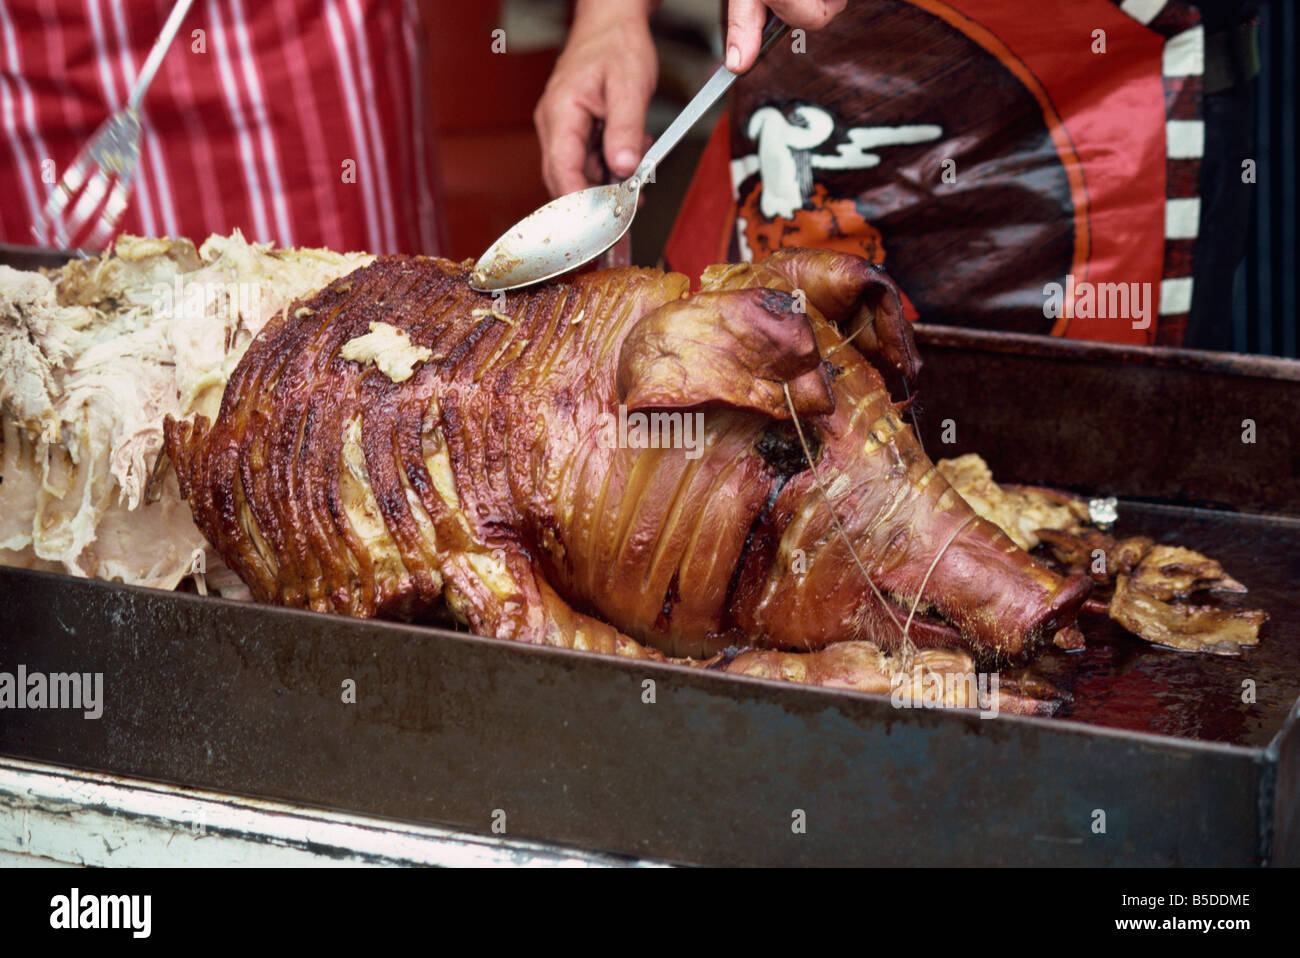 Close-up of the head of a roasted pig in Tewkesbury, Gloucestershire, England, Europe Stock Photo